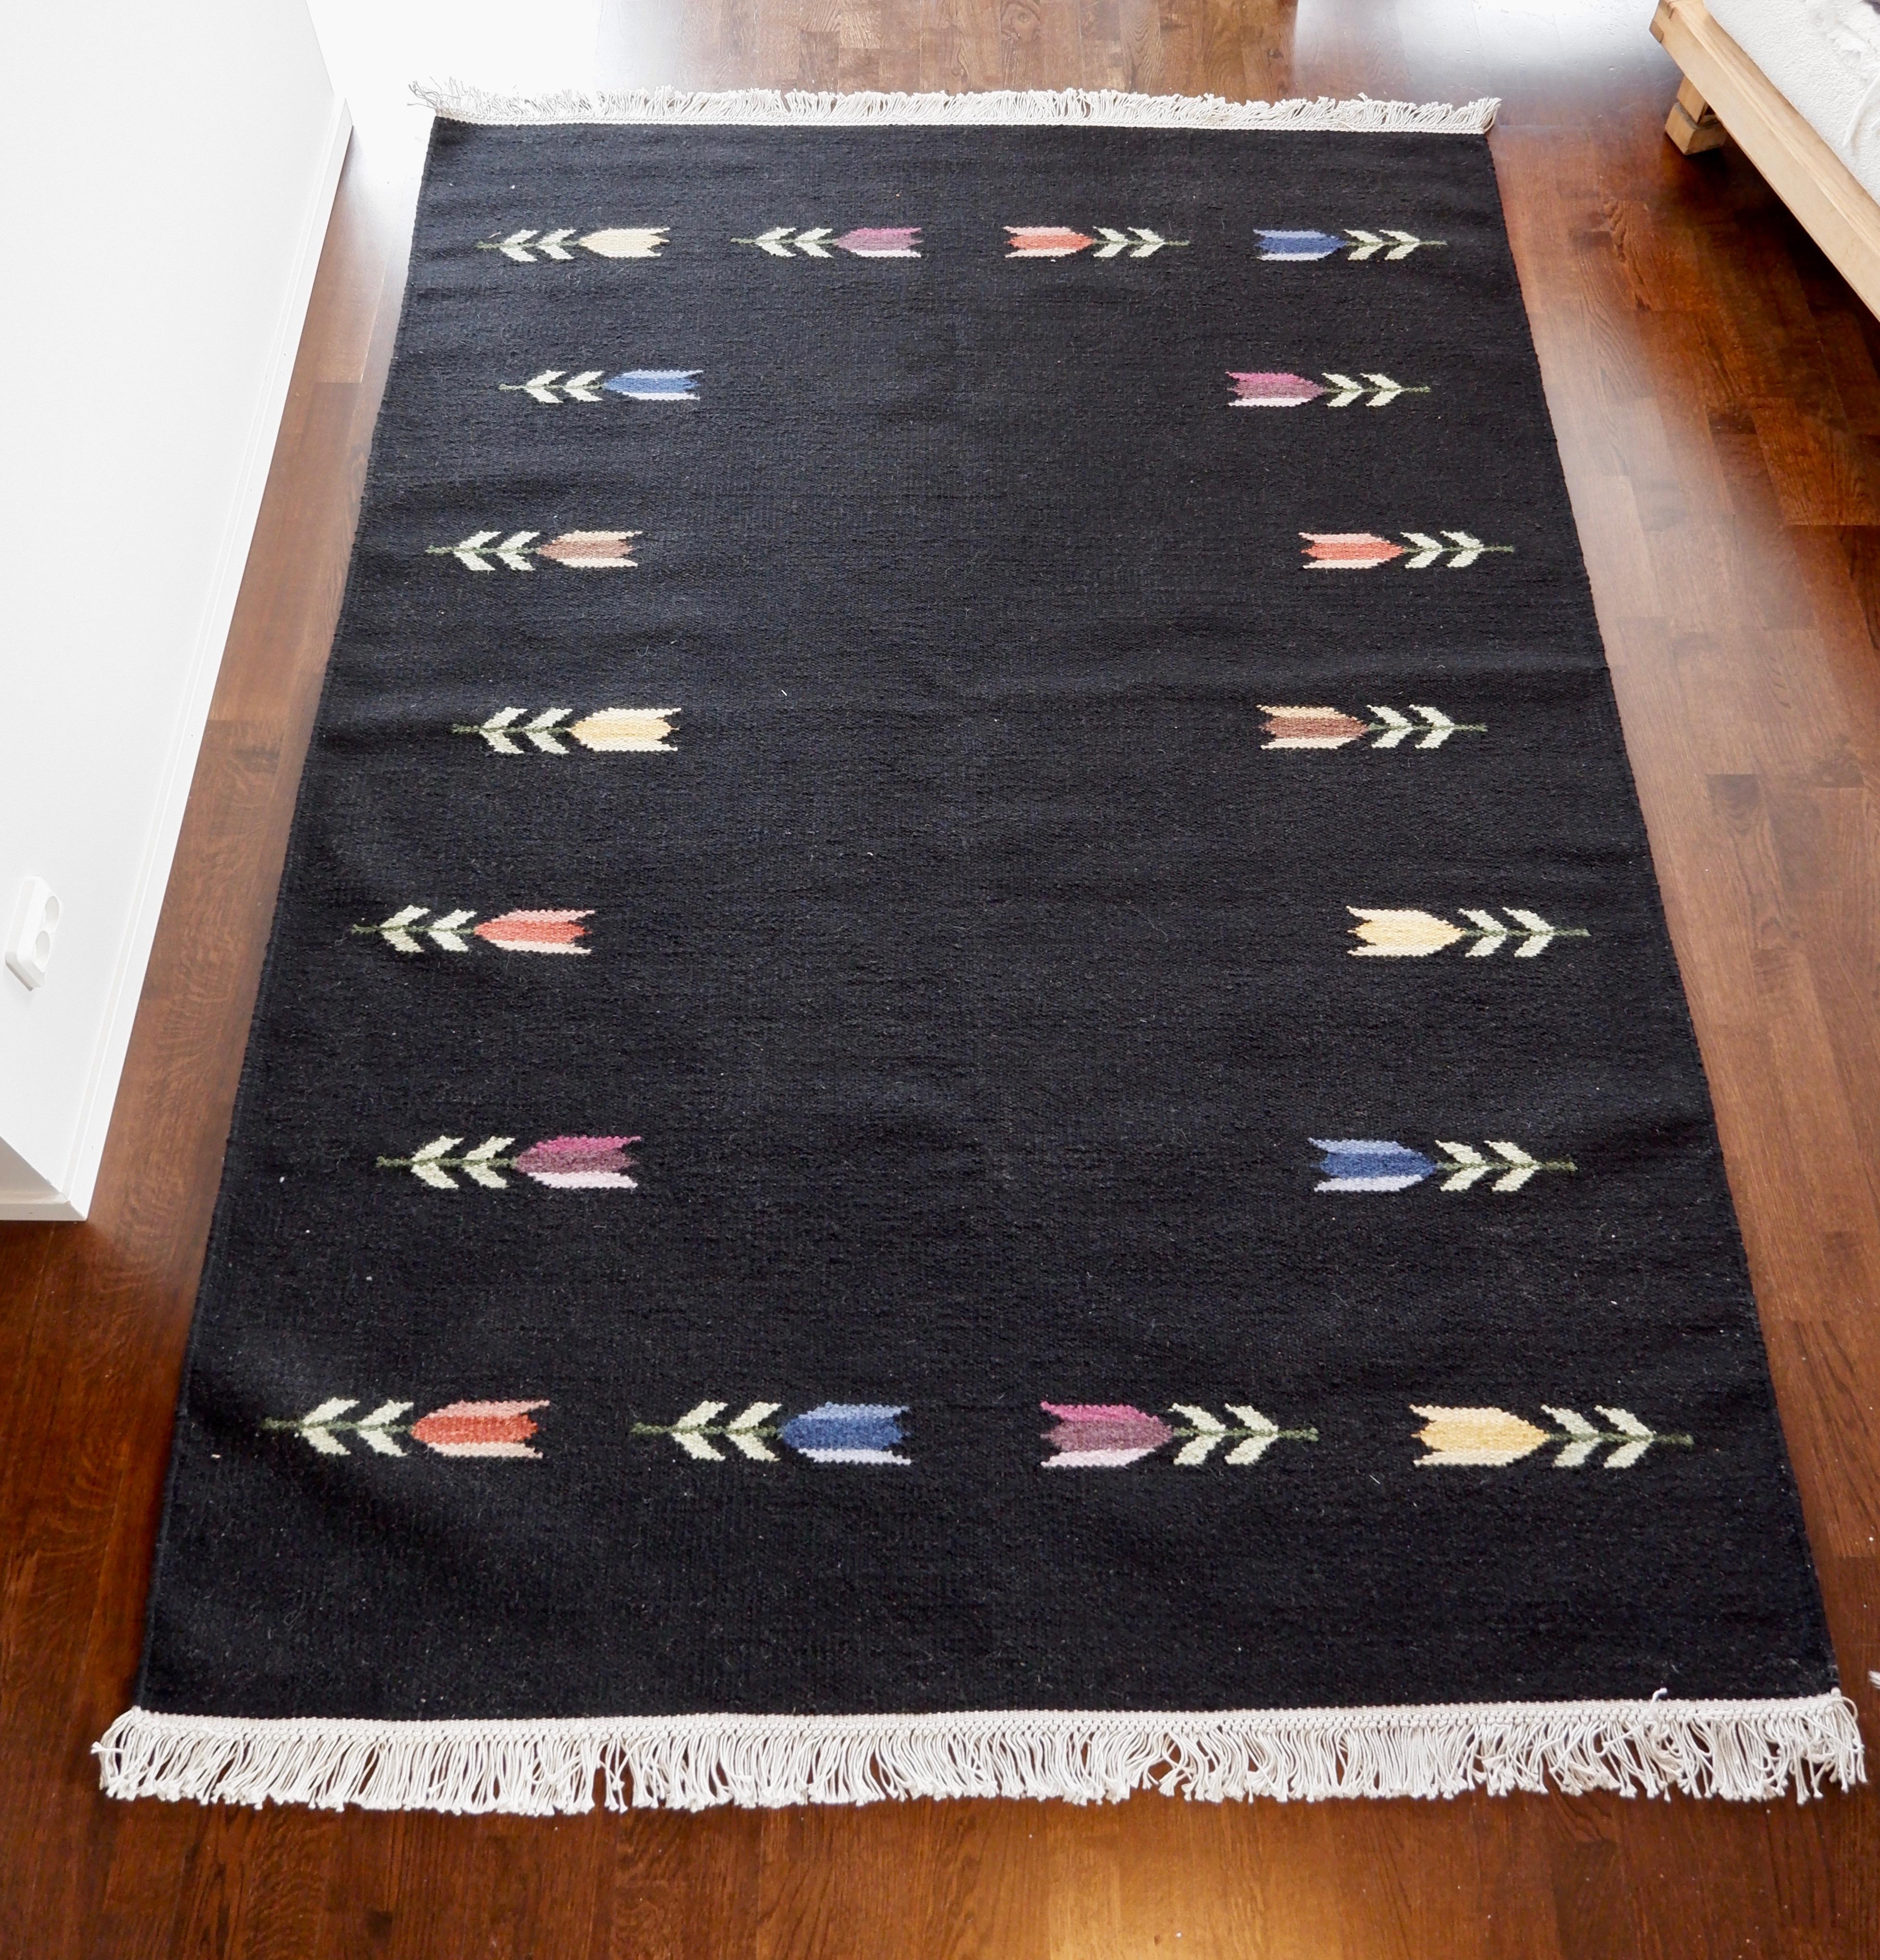 Typical Röllakan rug made in Sweden during the 20th century. The rug gets the typical characteristic of the Sweden Röllakan with flower shapes. The rug is massive, over 240 cm in length, and it's fully made in wool. No stains or damages.